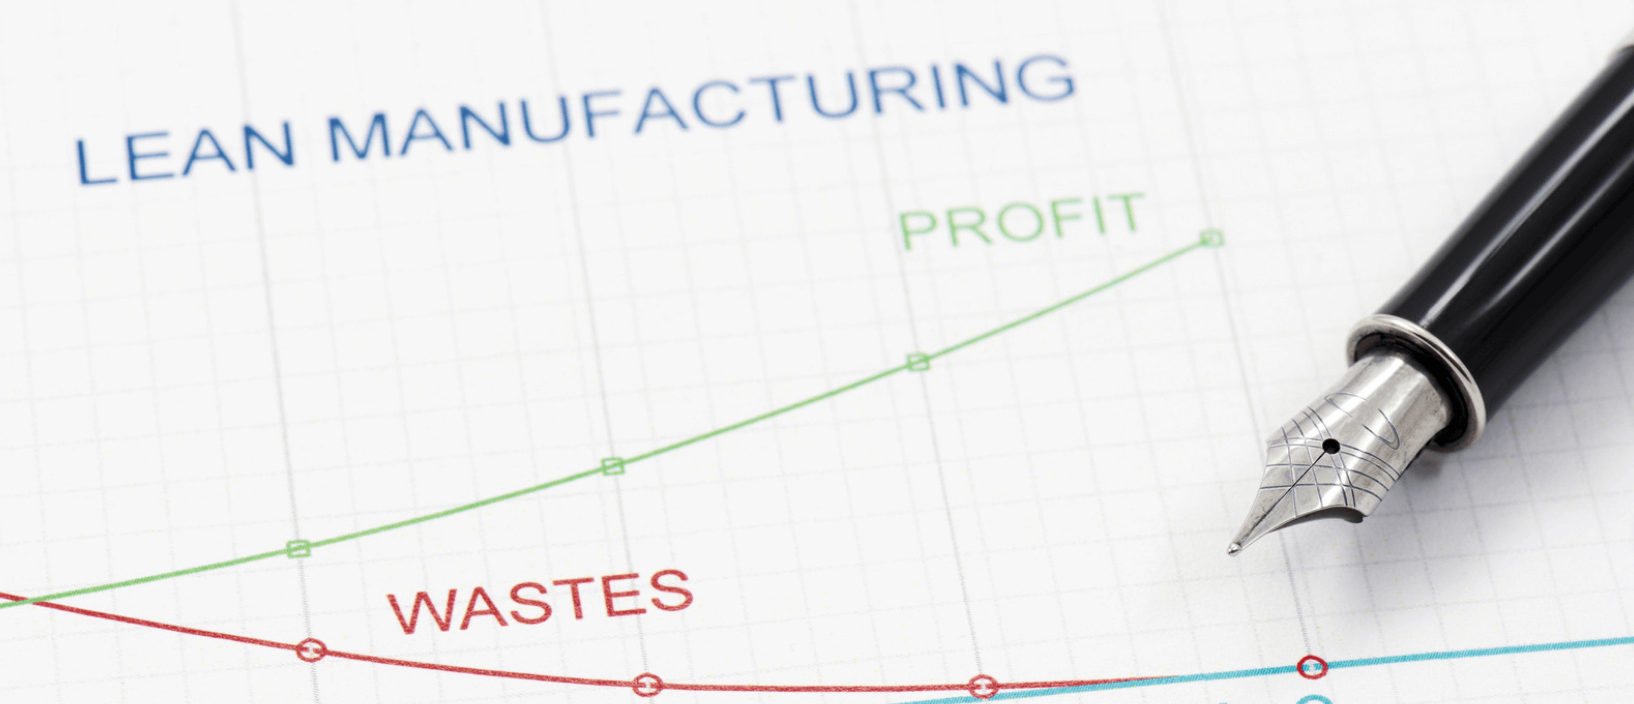 This image show the impact that your lean efforts can have on profit margins and waste in the factory.